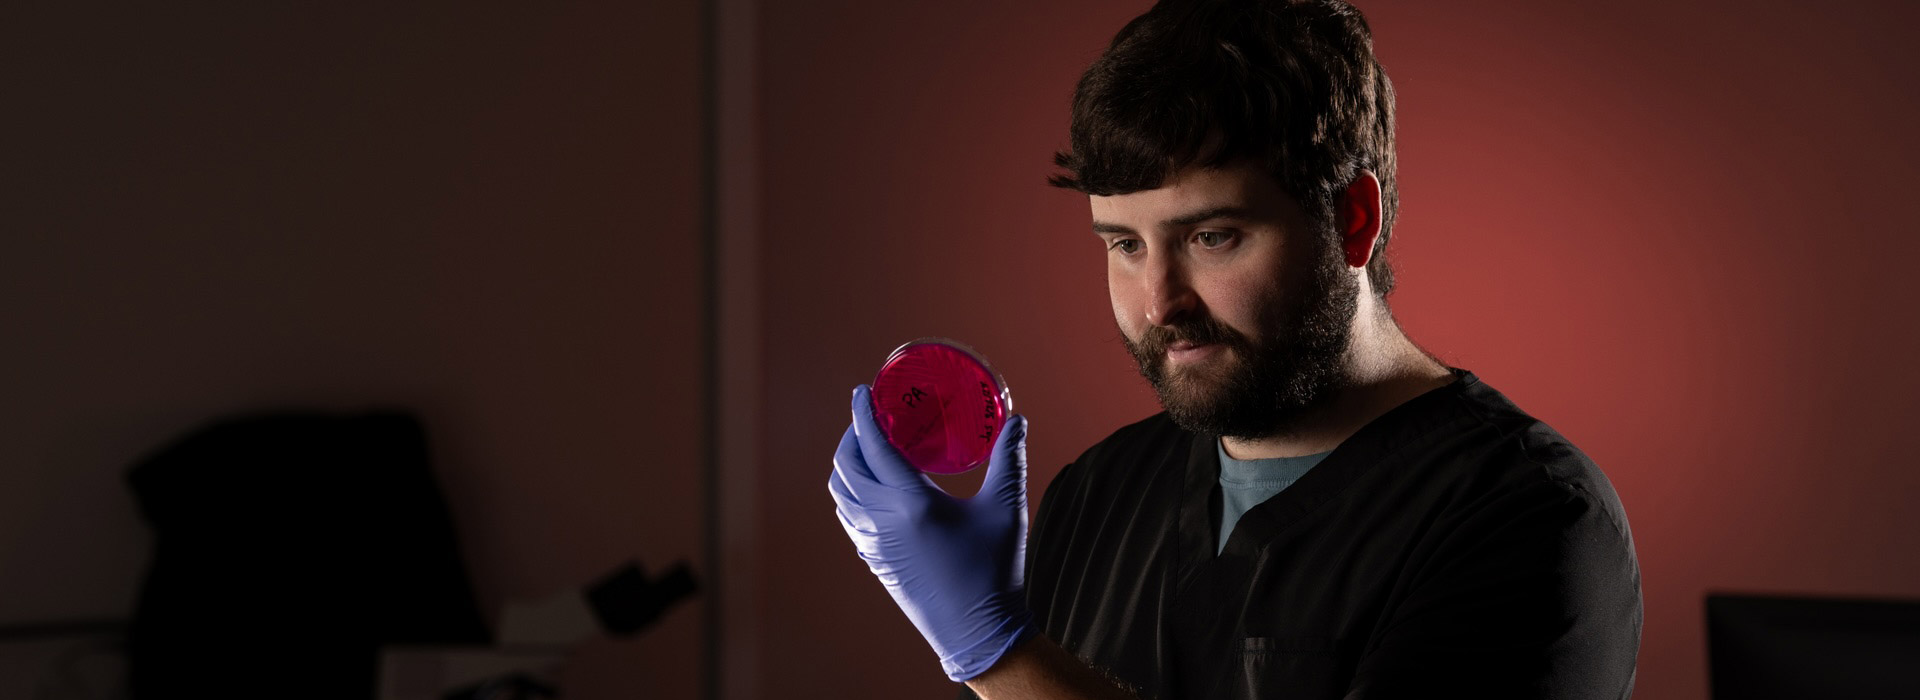 man looking at a prepped culture in a petri dish